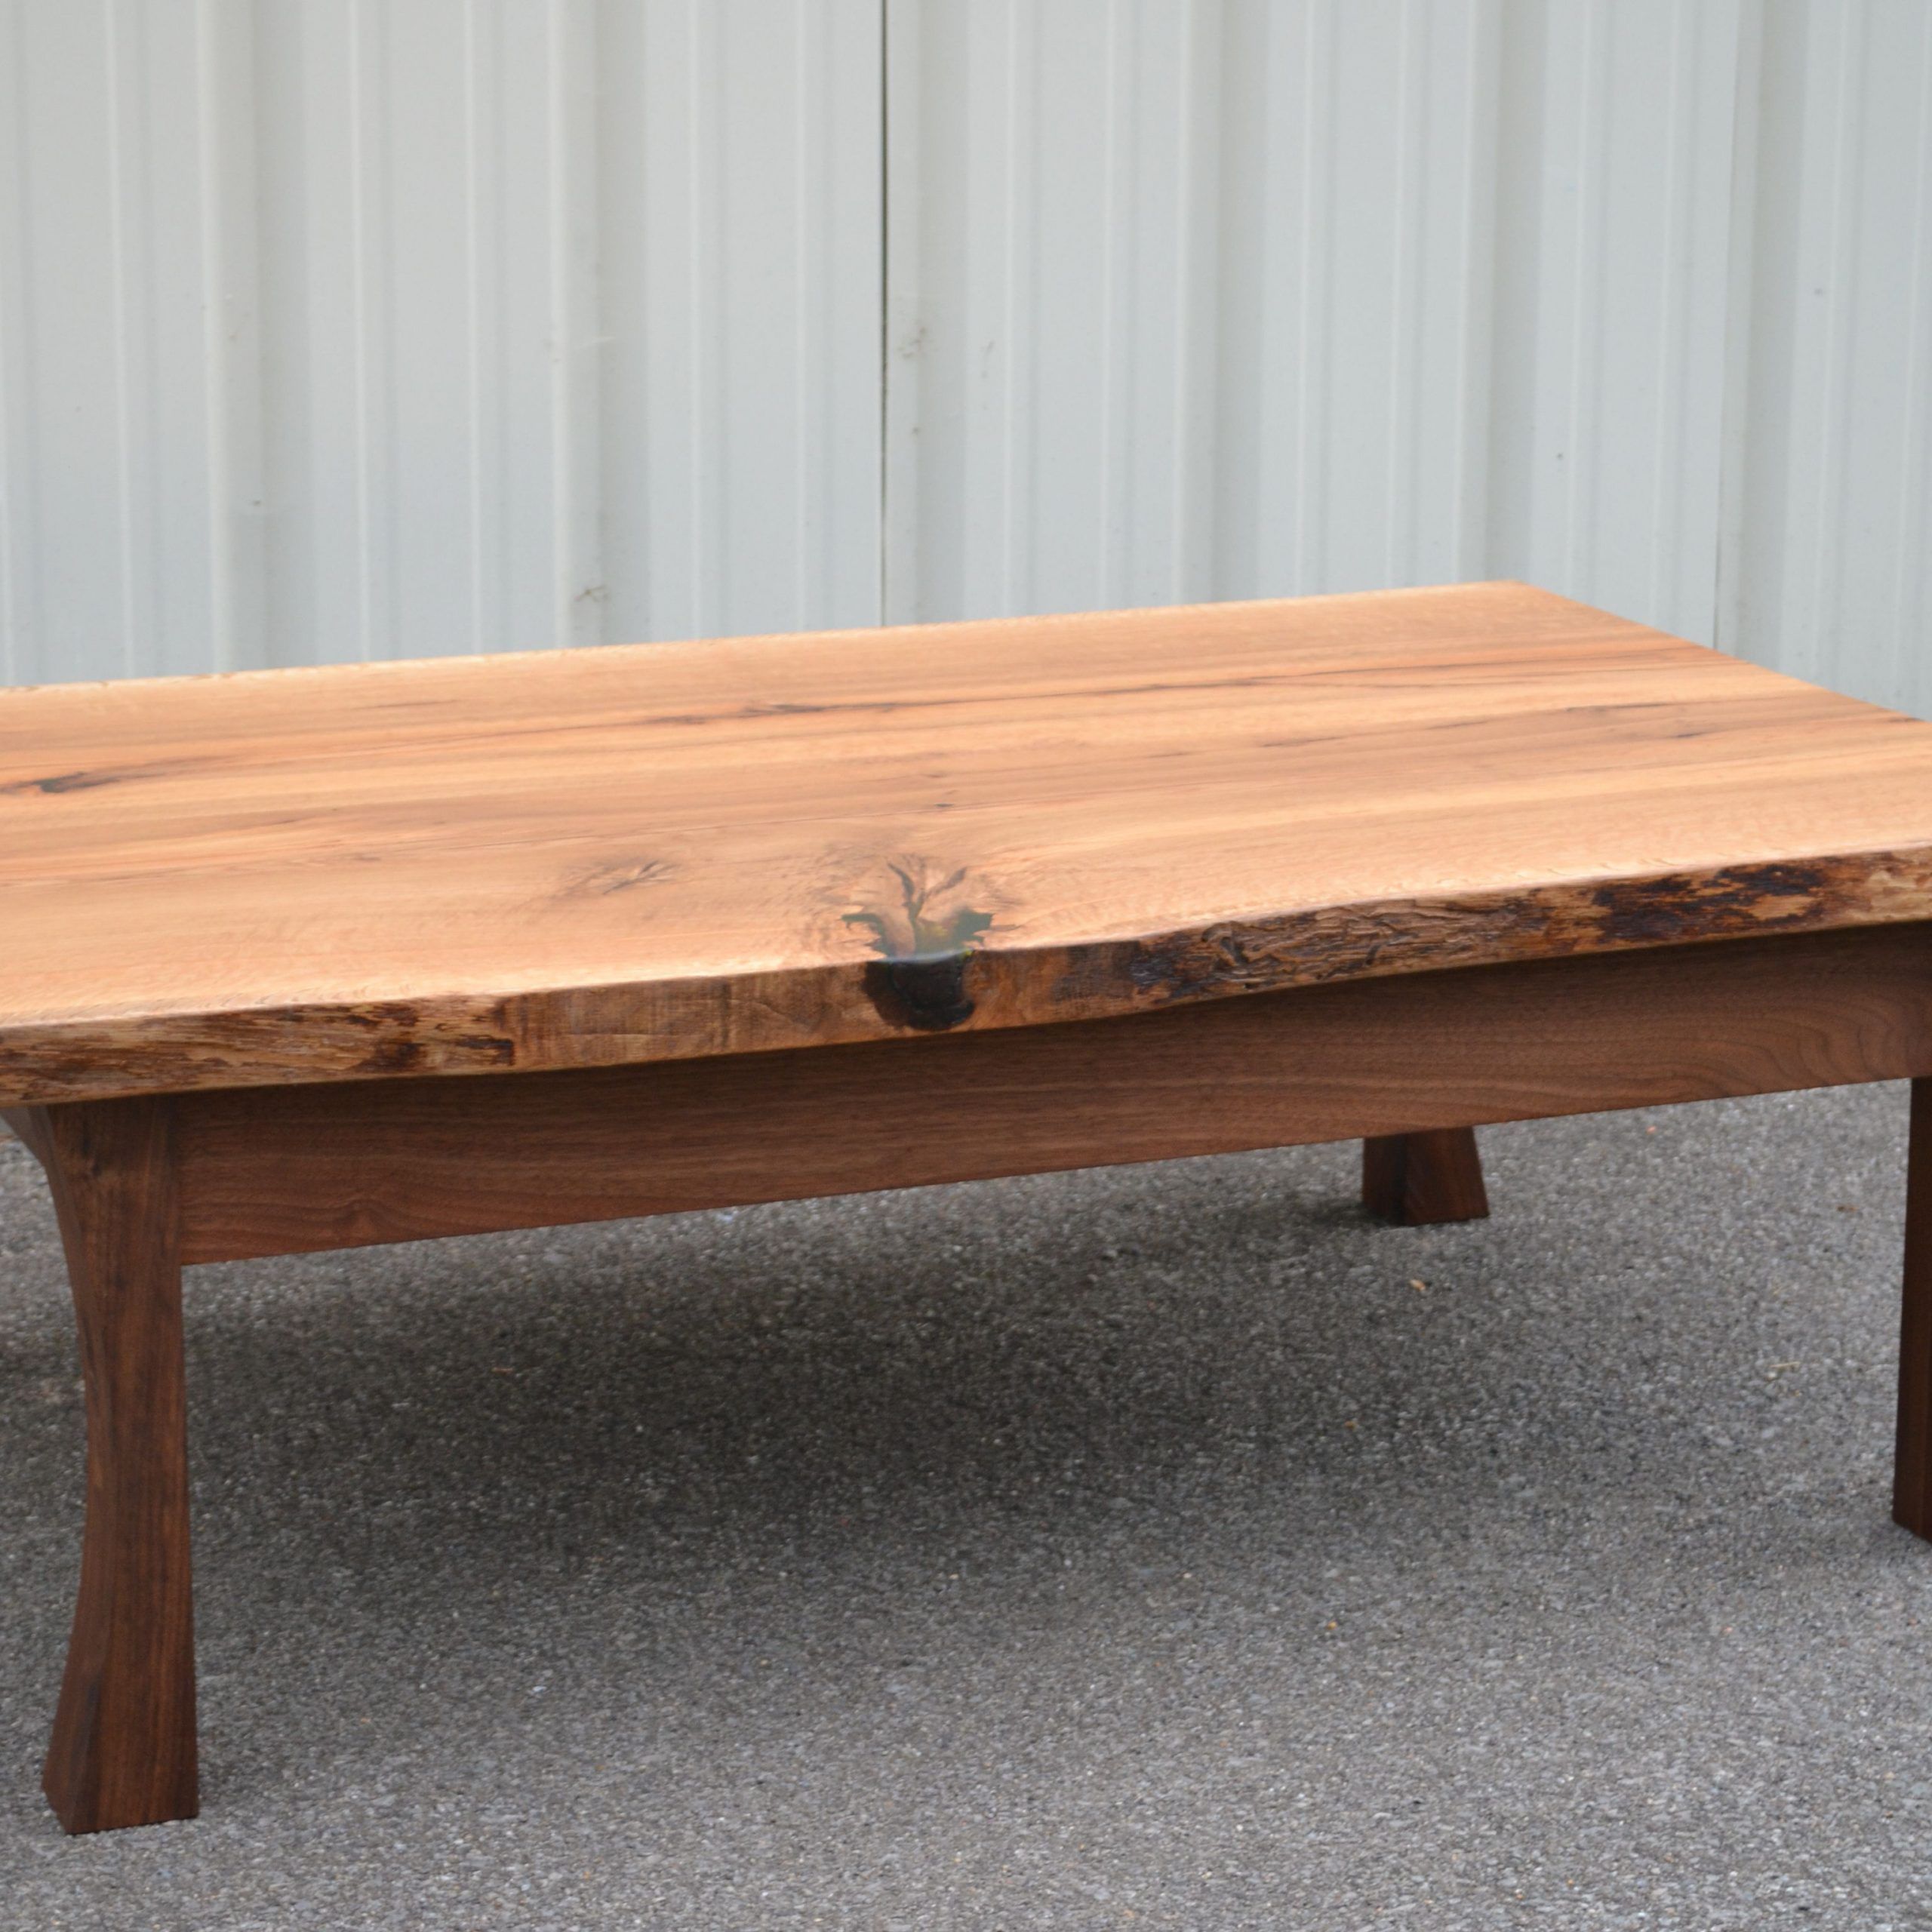 Widely Used Rustic Oak And Black Coffee Tables With Regard To The Unique Rustic Coffee Tables For Sale (Gallery 2 of 20)